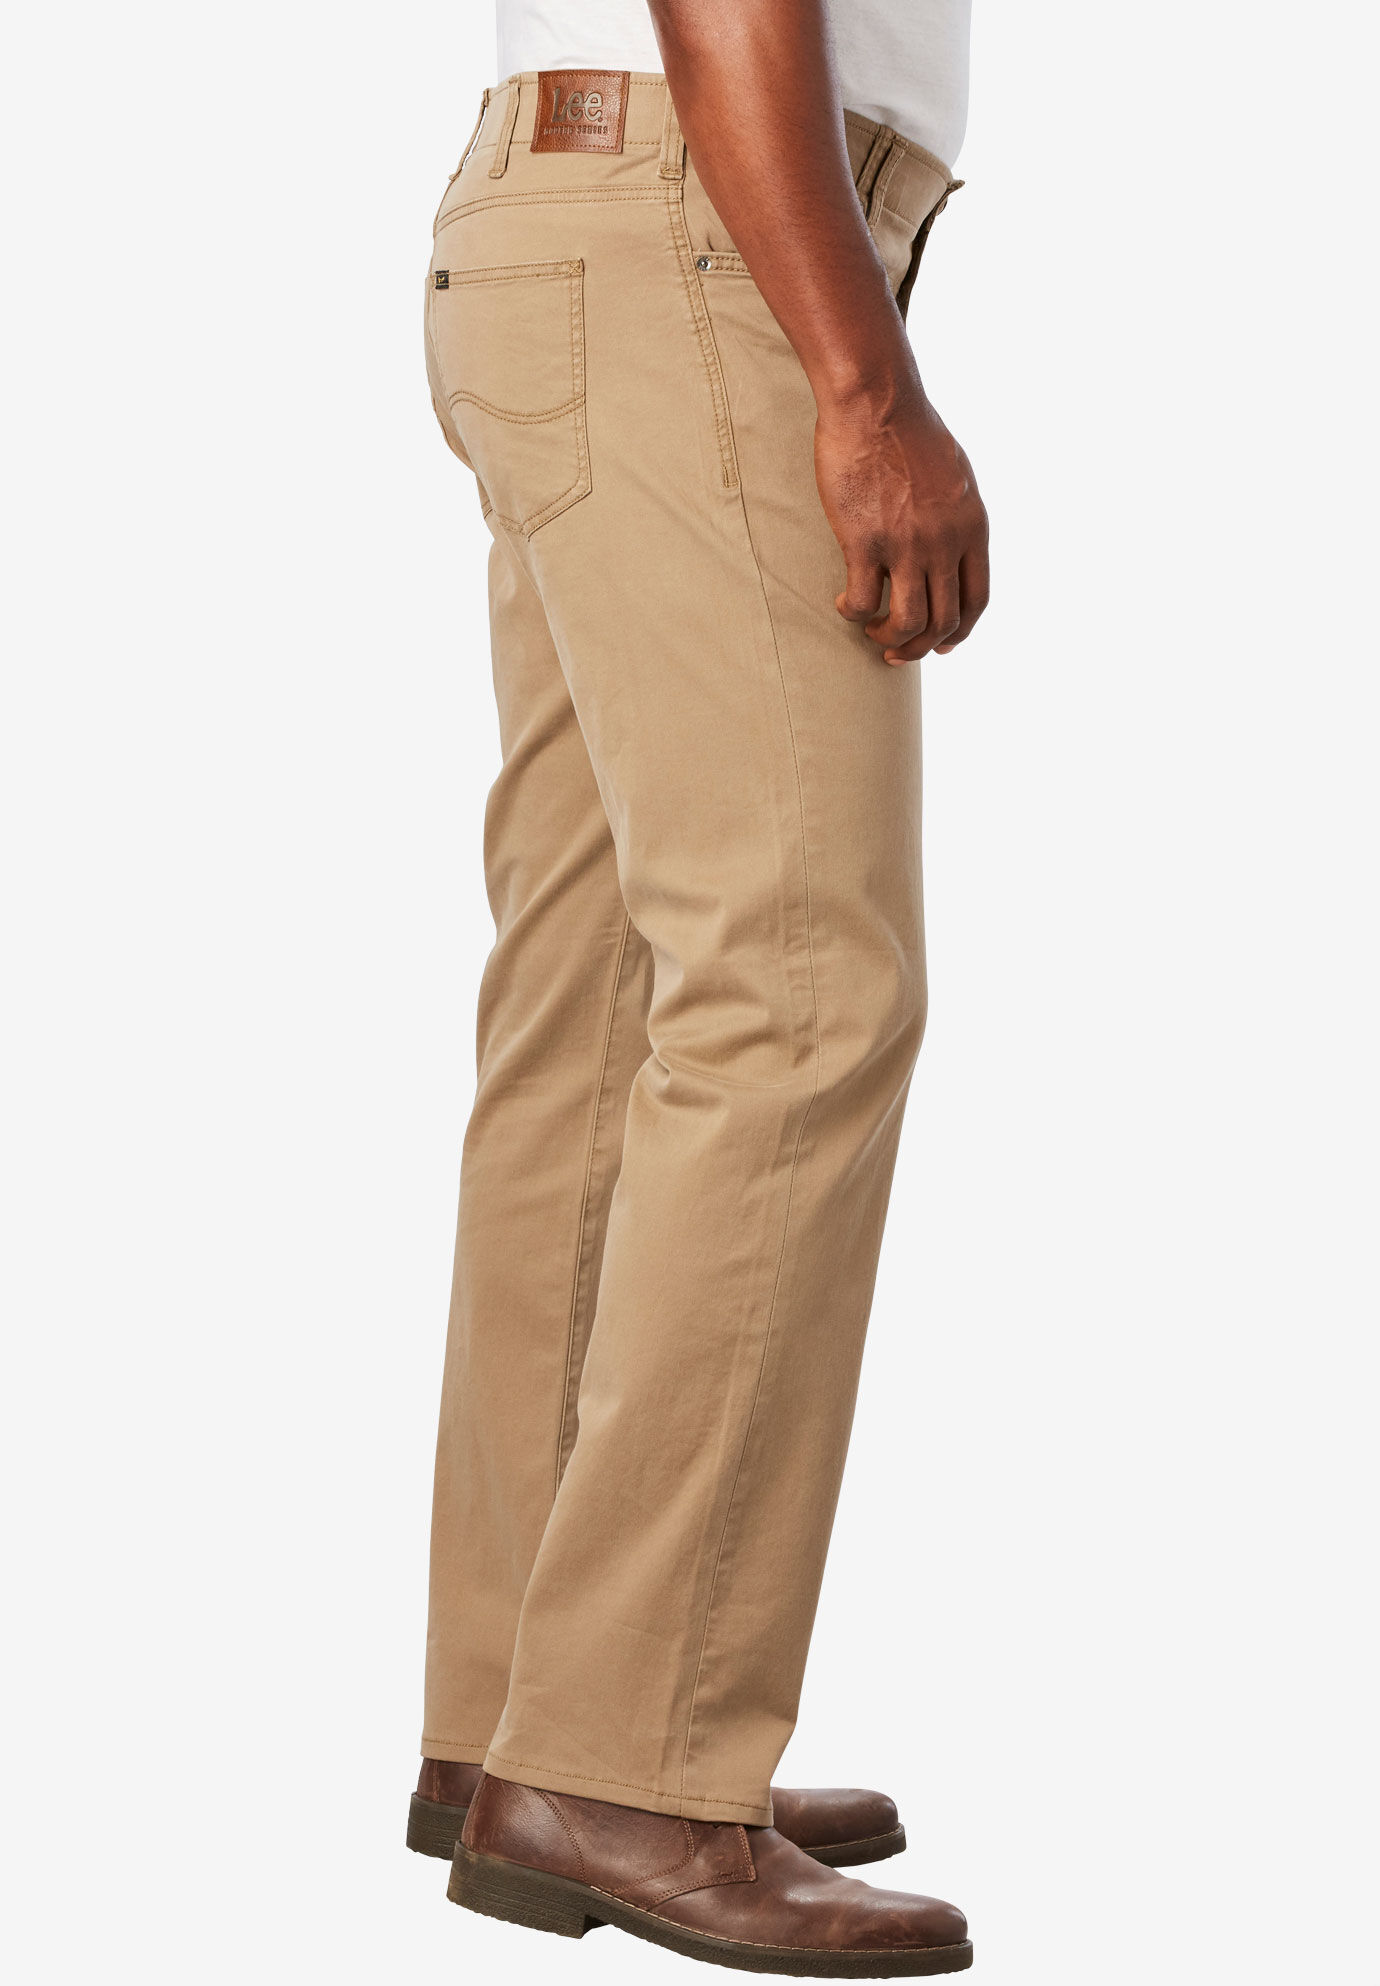 lee extreme motion pants